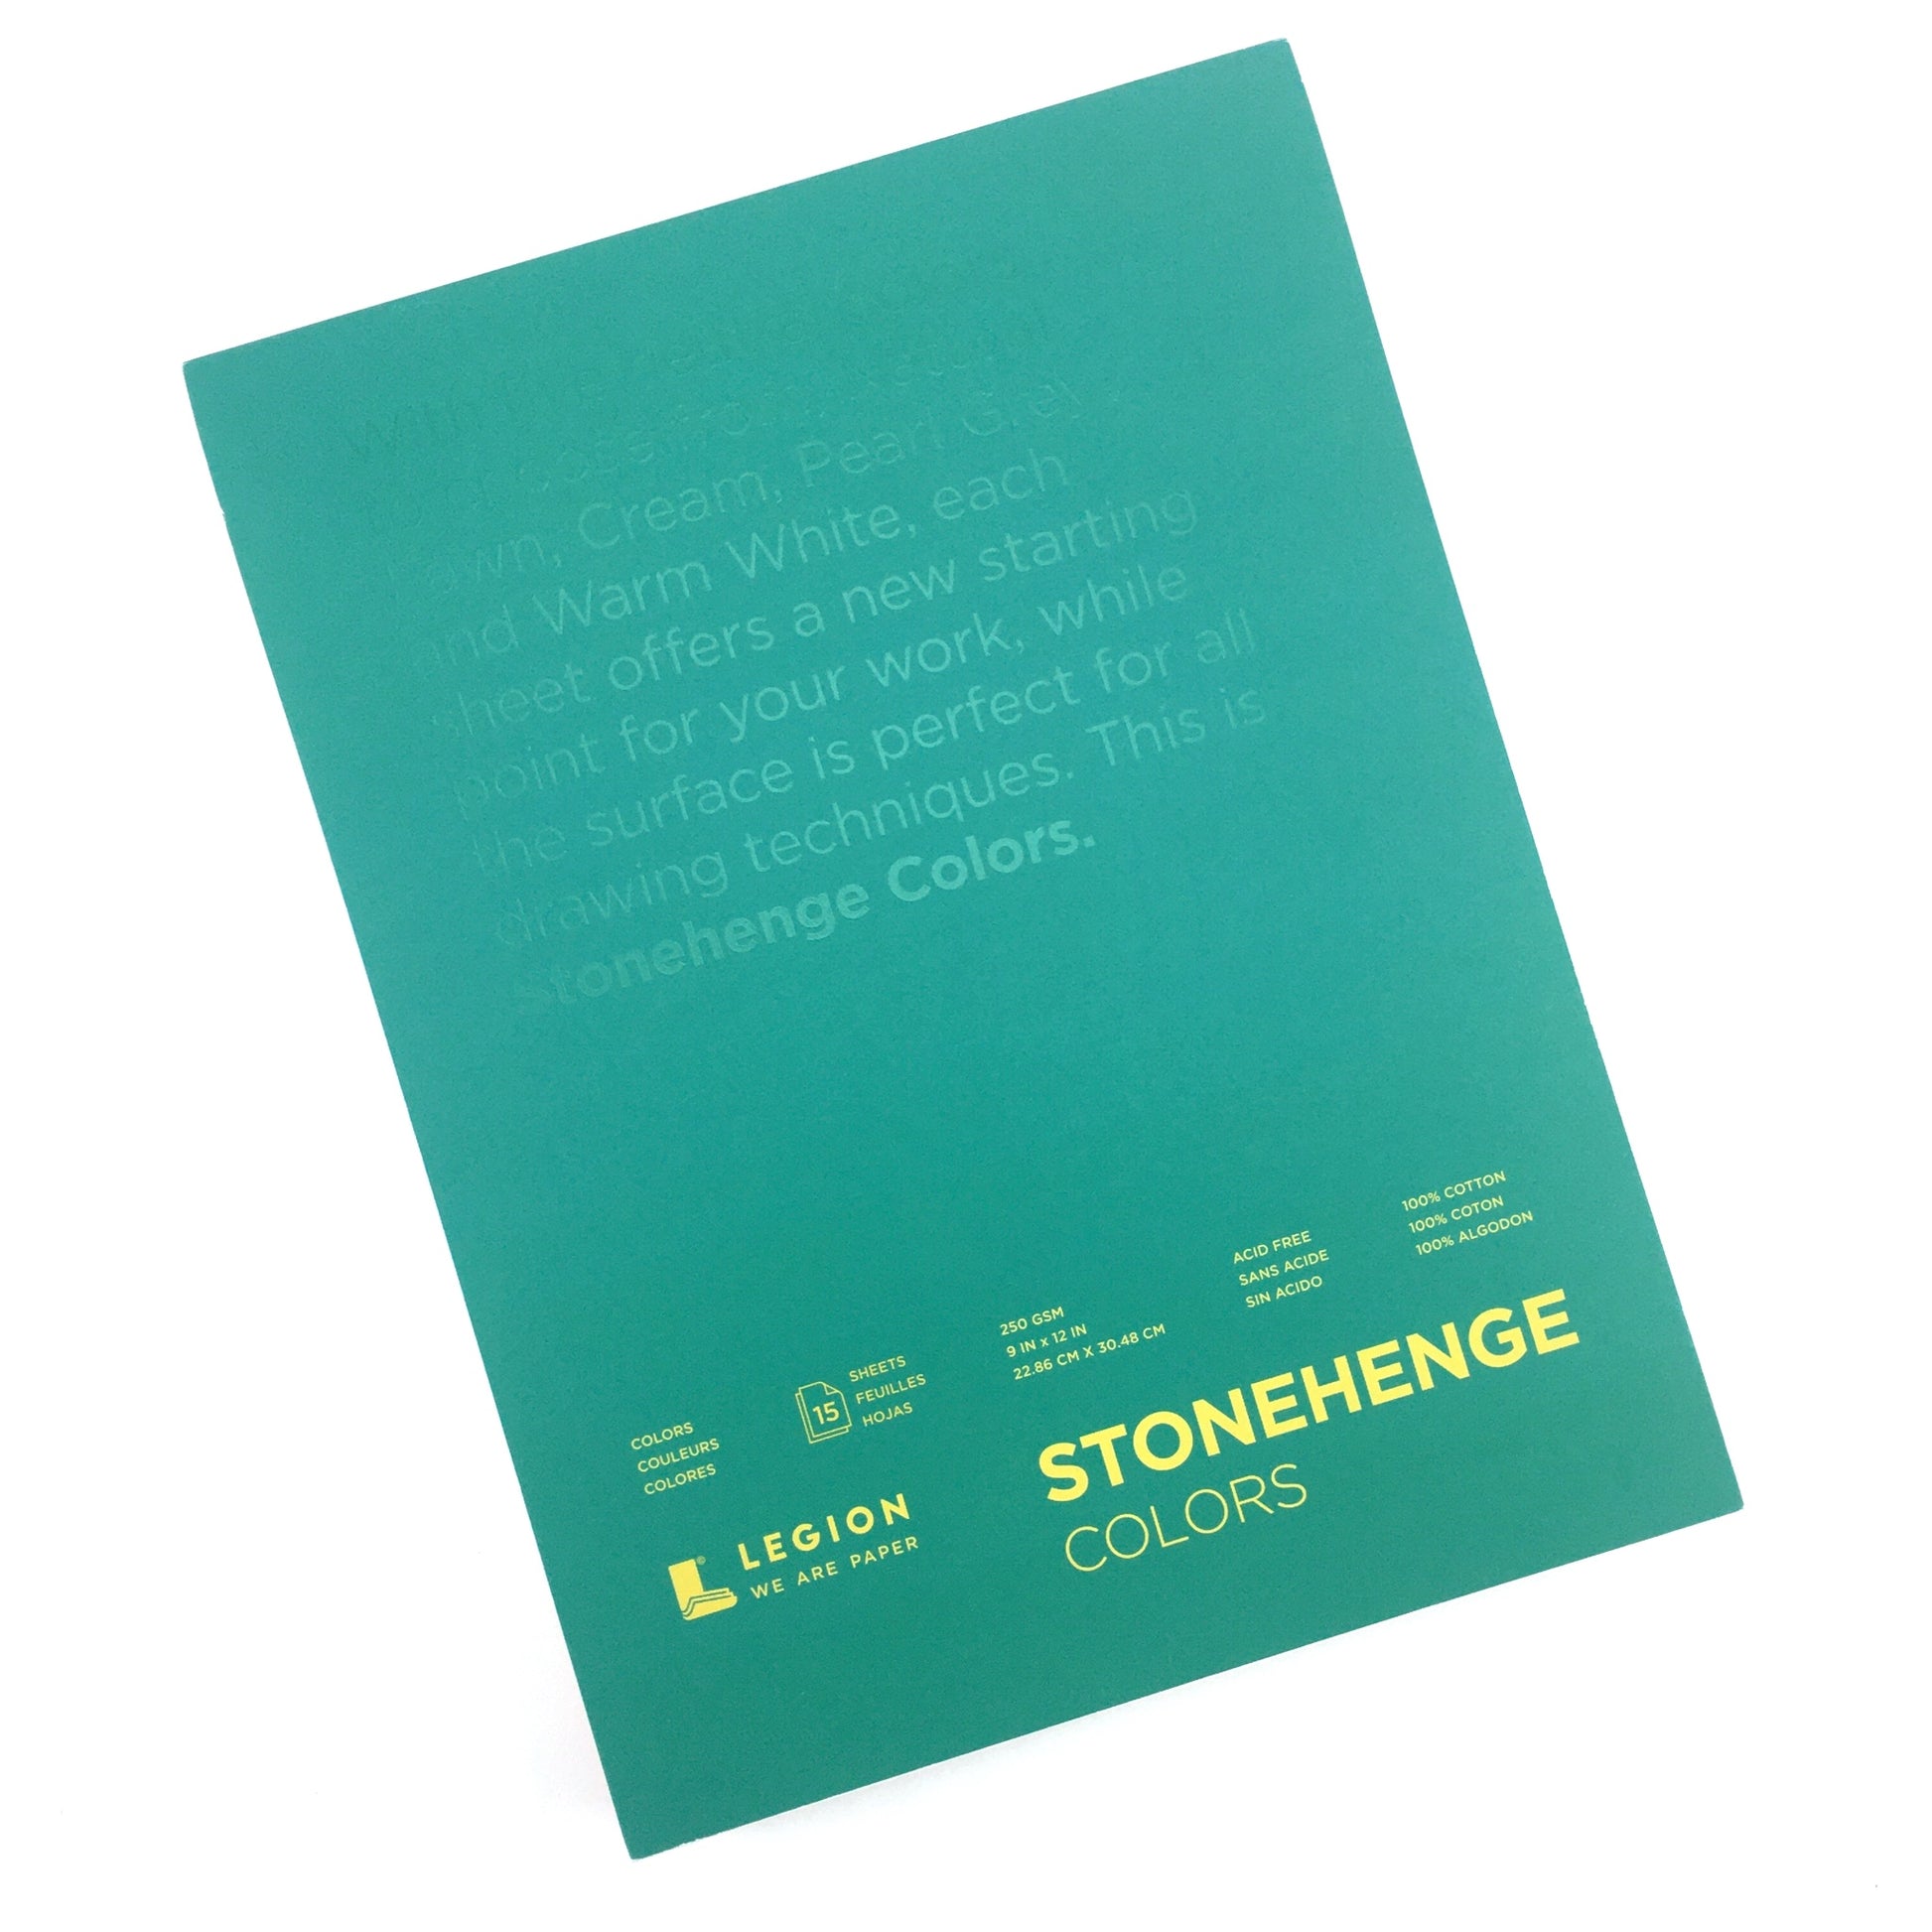 Legion Stonehenge Color Pad - 9 x 12 inches - by Stonehenge - K. A. Artist Shop